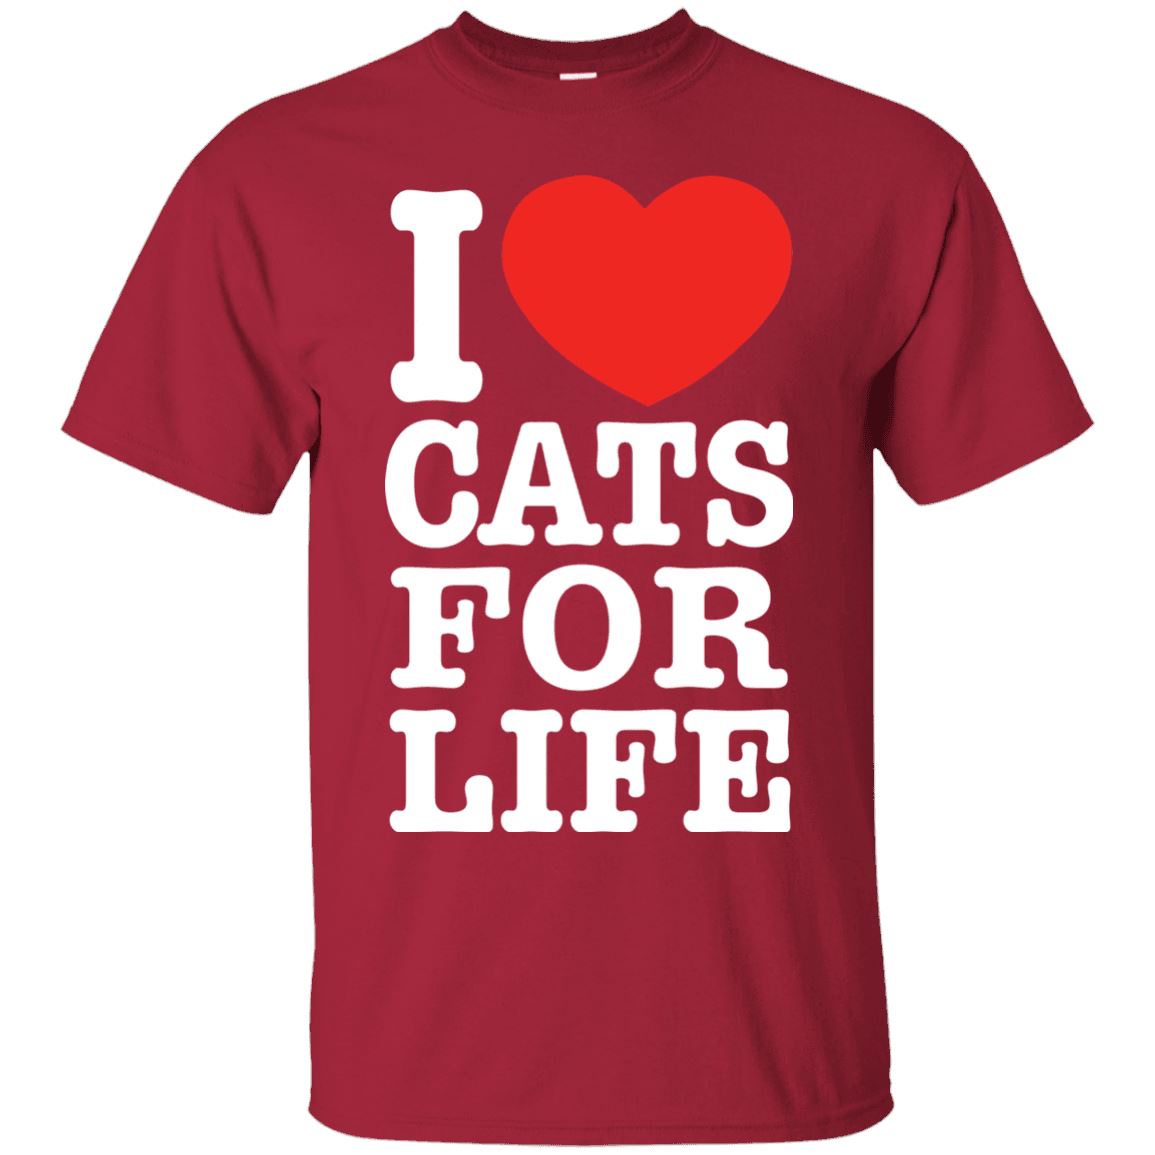 I Love Cats For Life - Cat Shirt